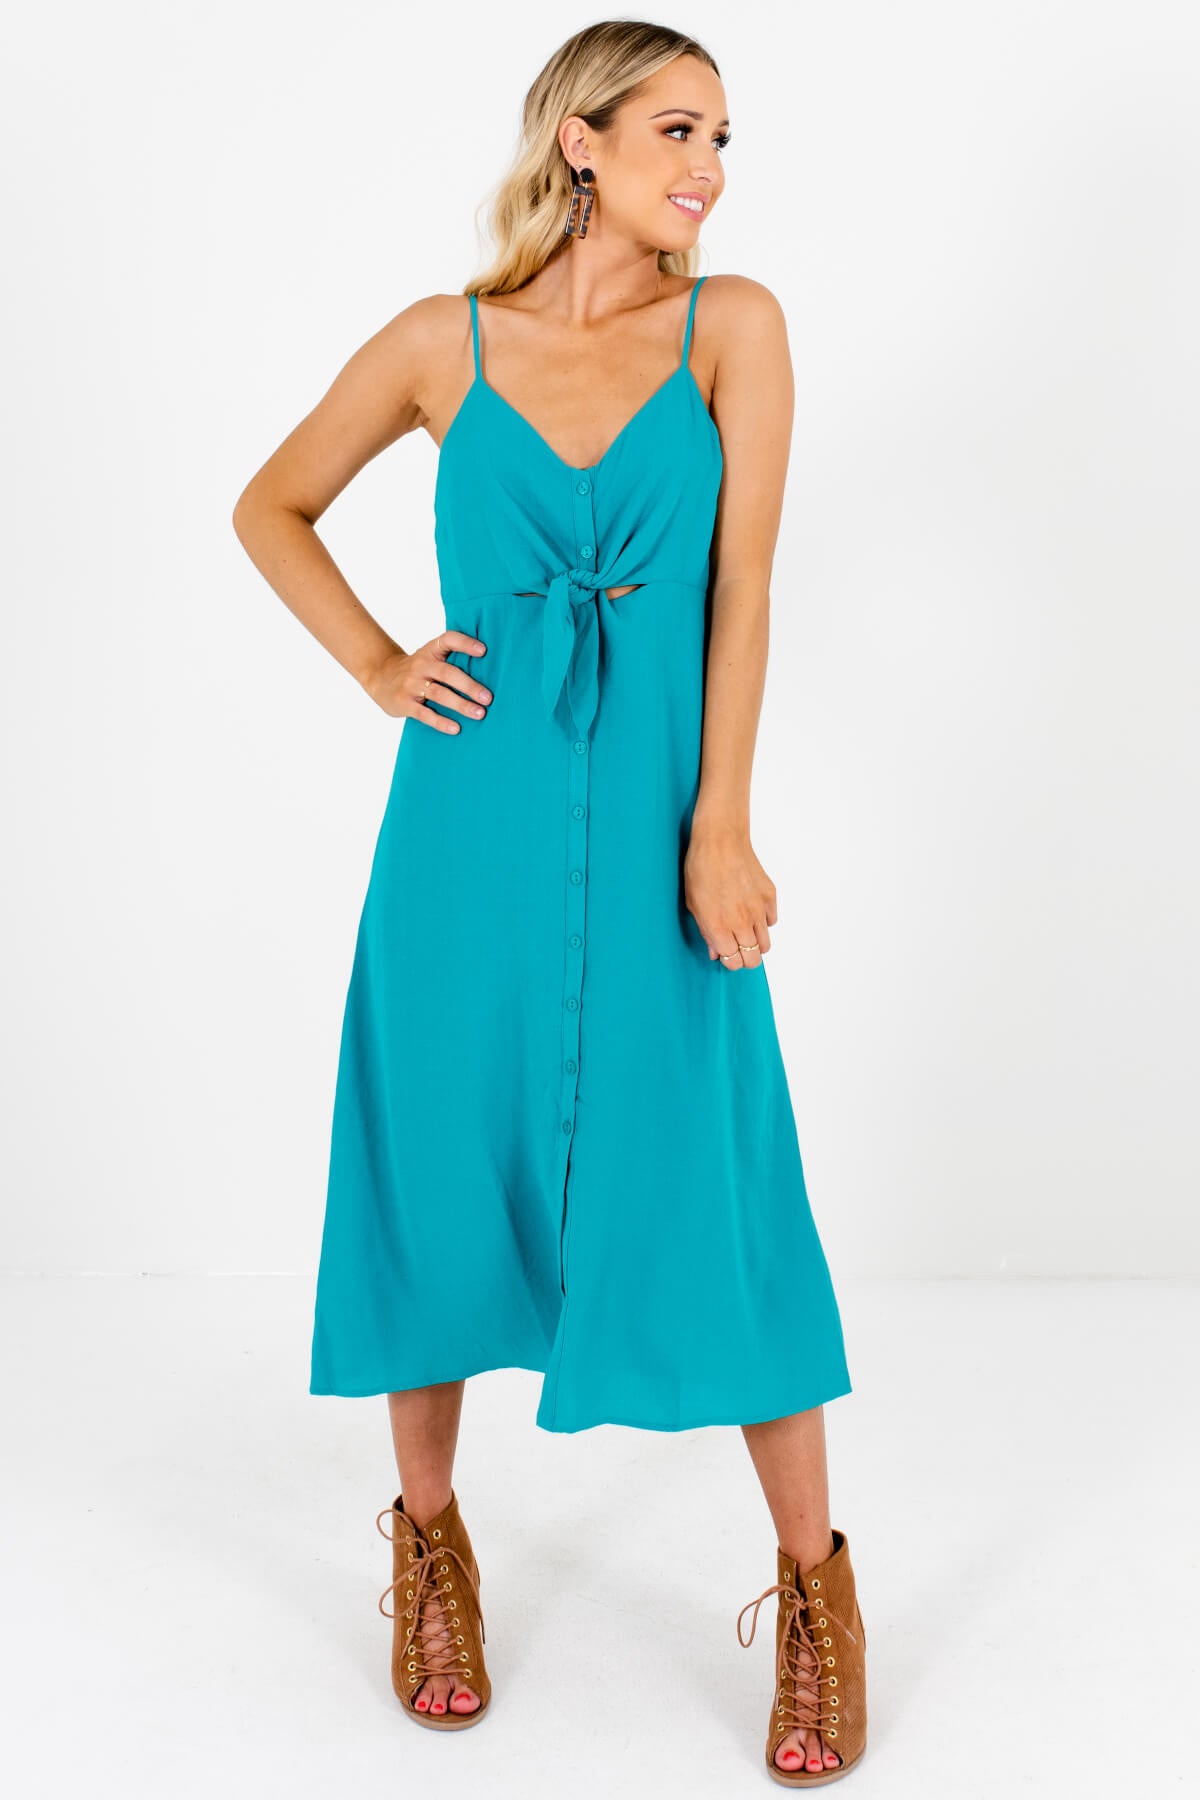 Turquoise Blue Teal Green Button-Up Midi Dresses for Women